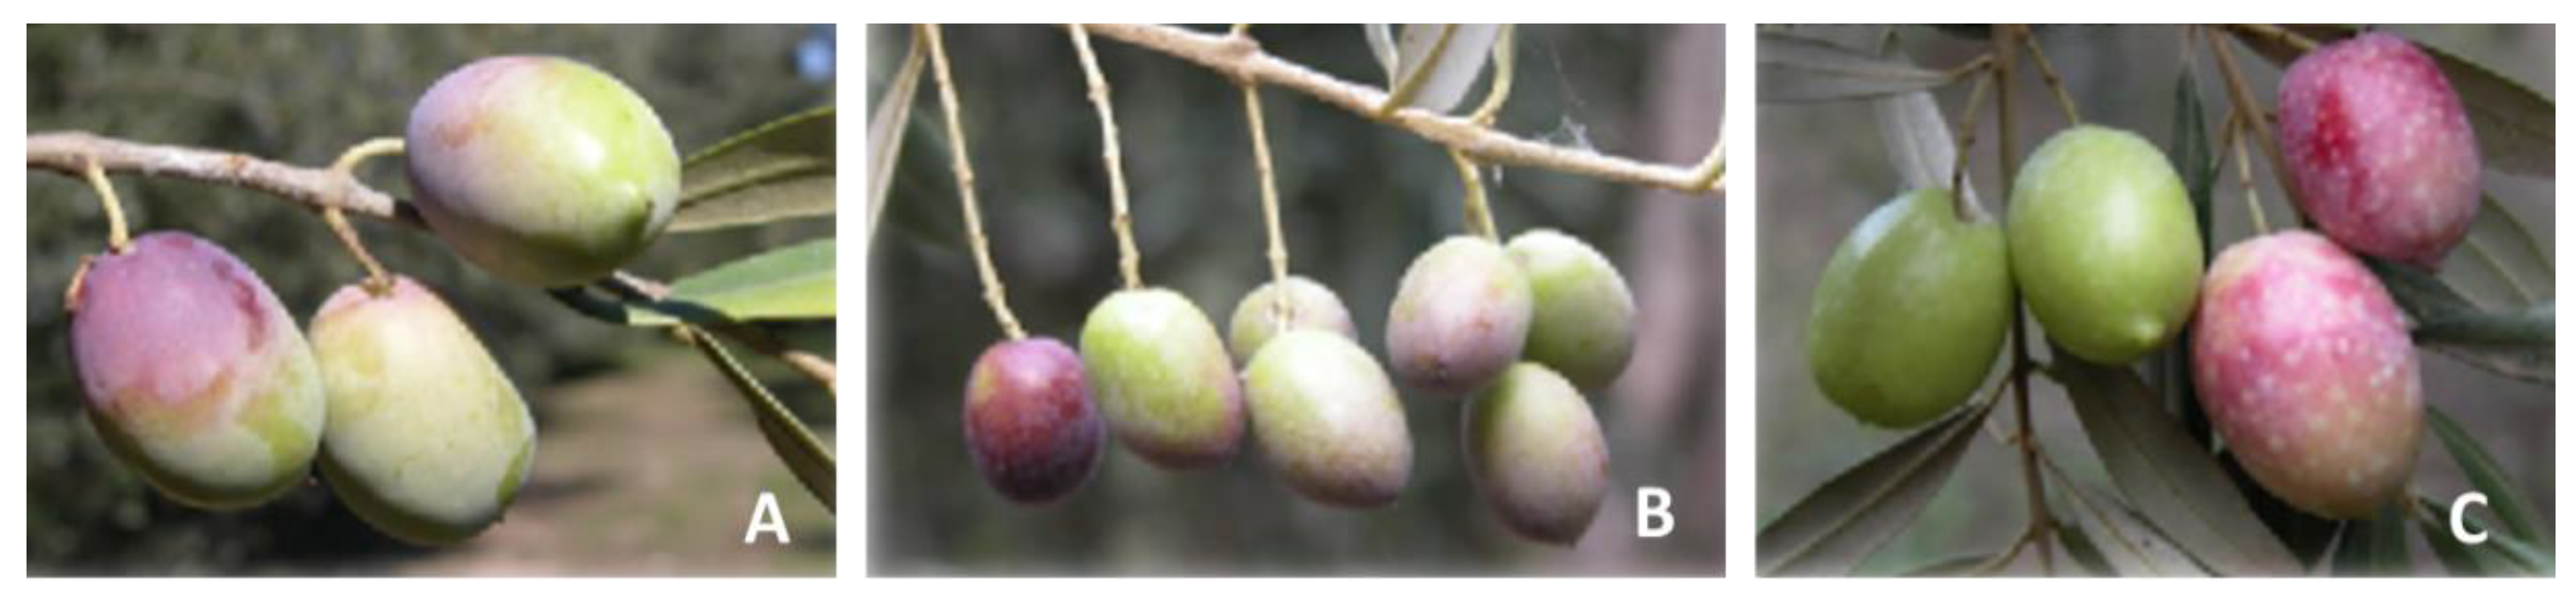 Horticulturae | Free Full-Text | Comparing Spanish-Style and Natural  Fermentation Methods to Valorise Carolea, Nocellara Messinese and Leccino  as Table Olives